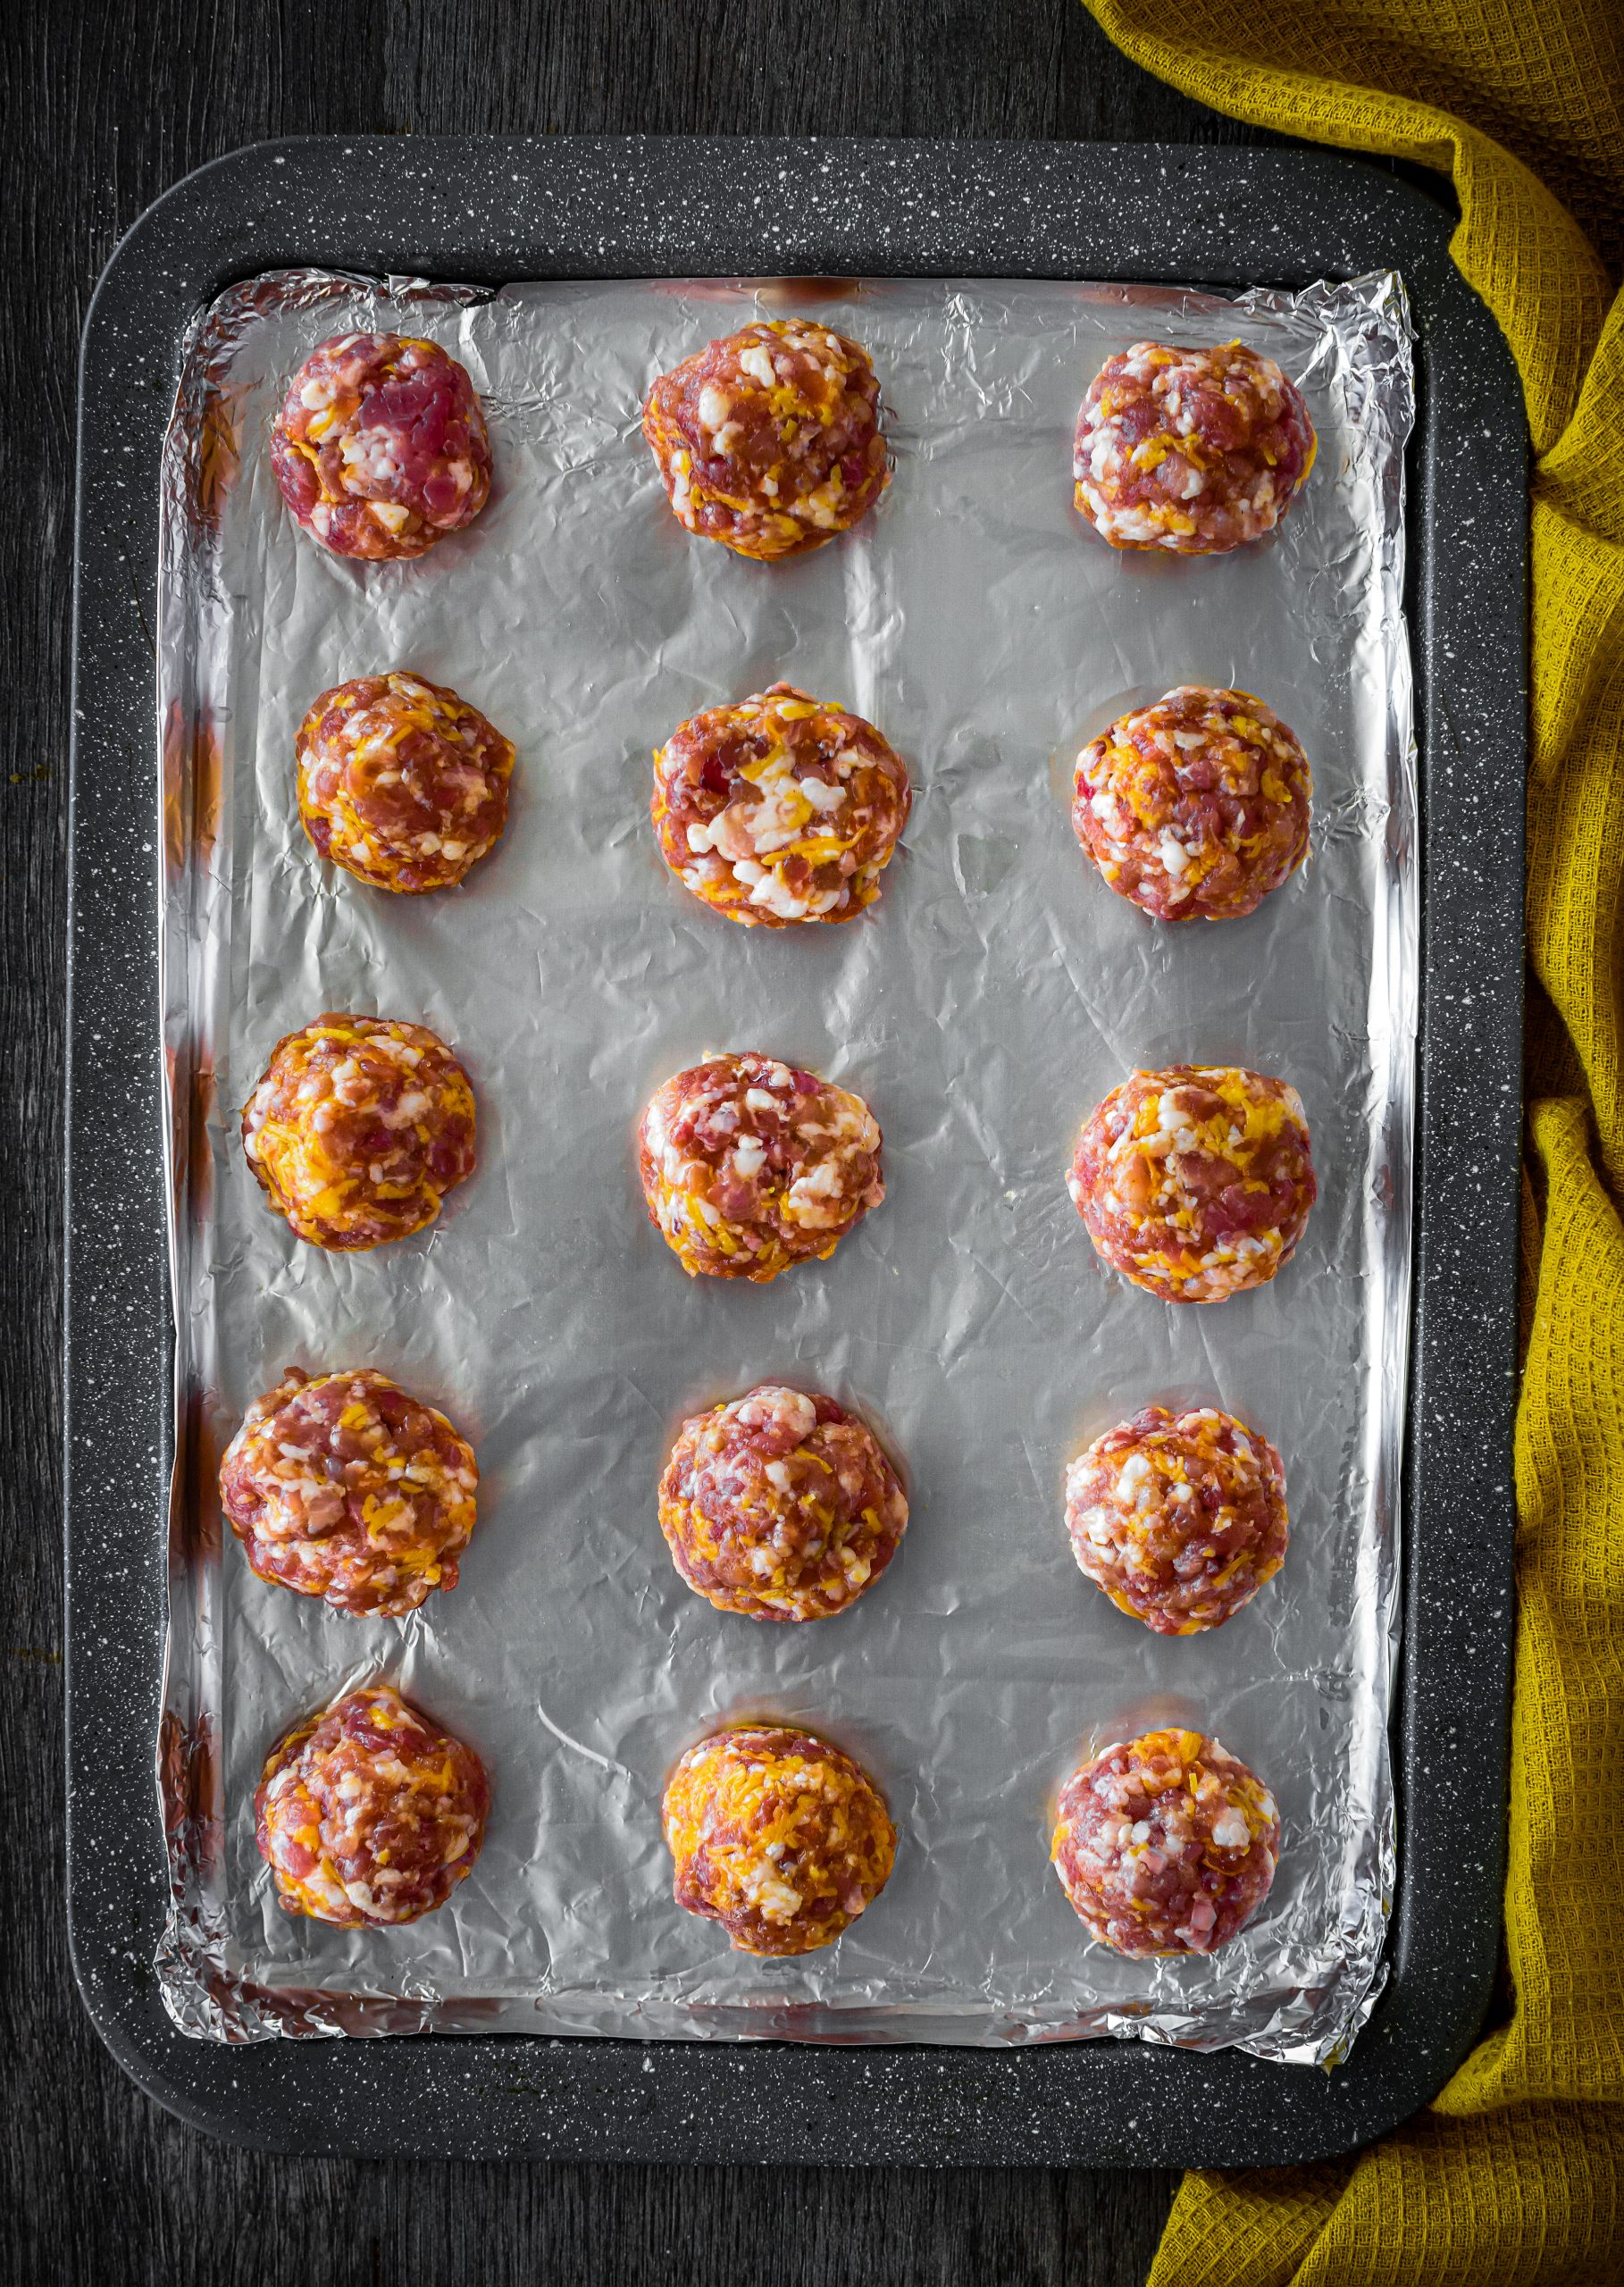 Form the mixture into evenly-sized meatballs, and place onto a parchment-lined baking sheet.